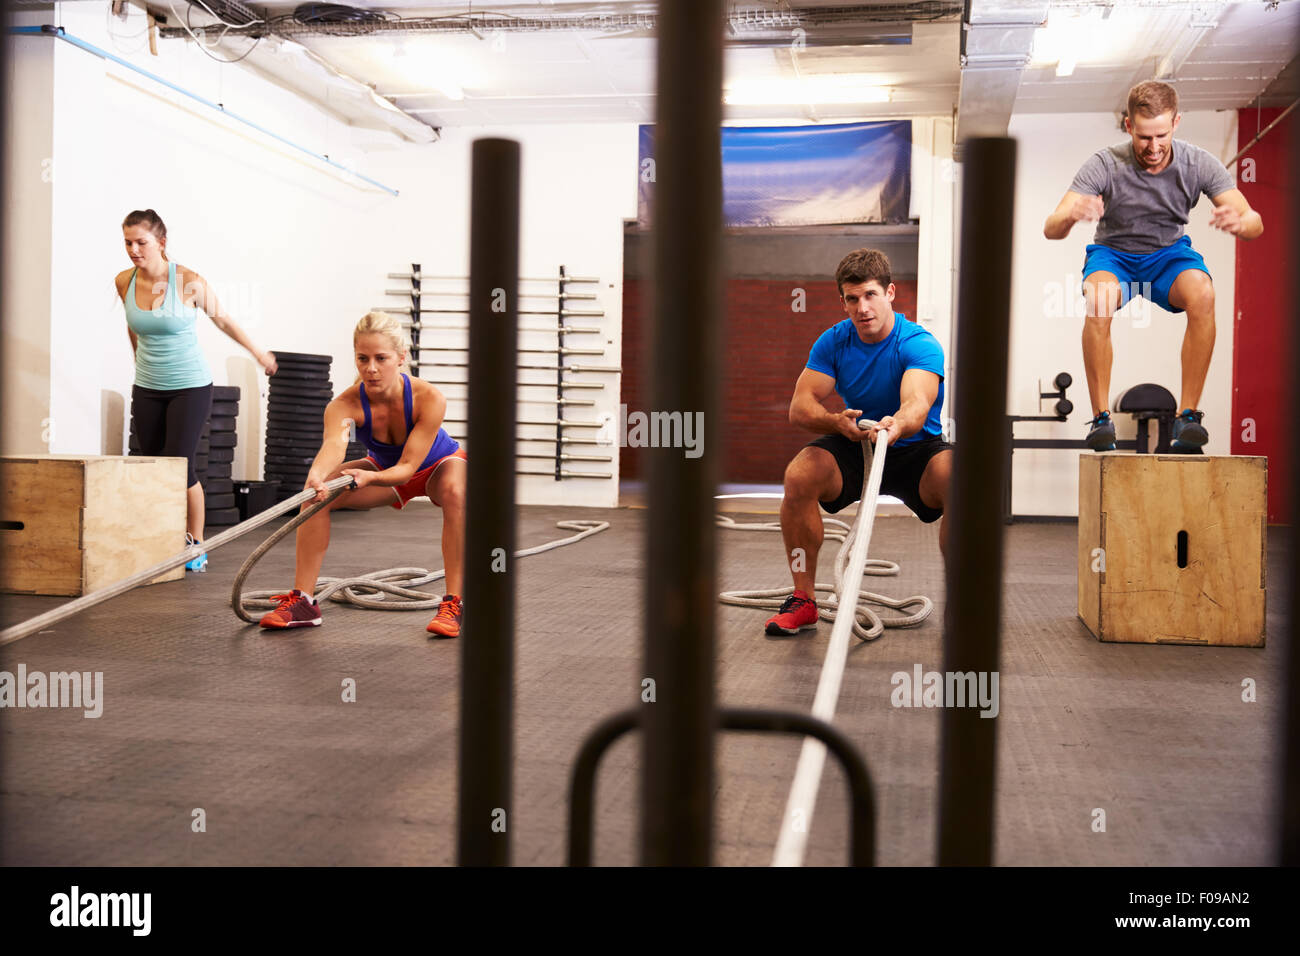 Group Of People In Gym Circuit Training Stock Photo